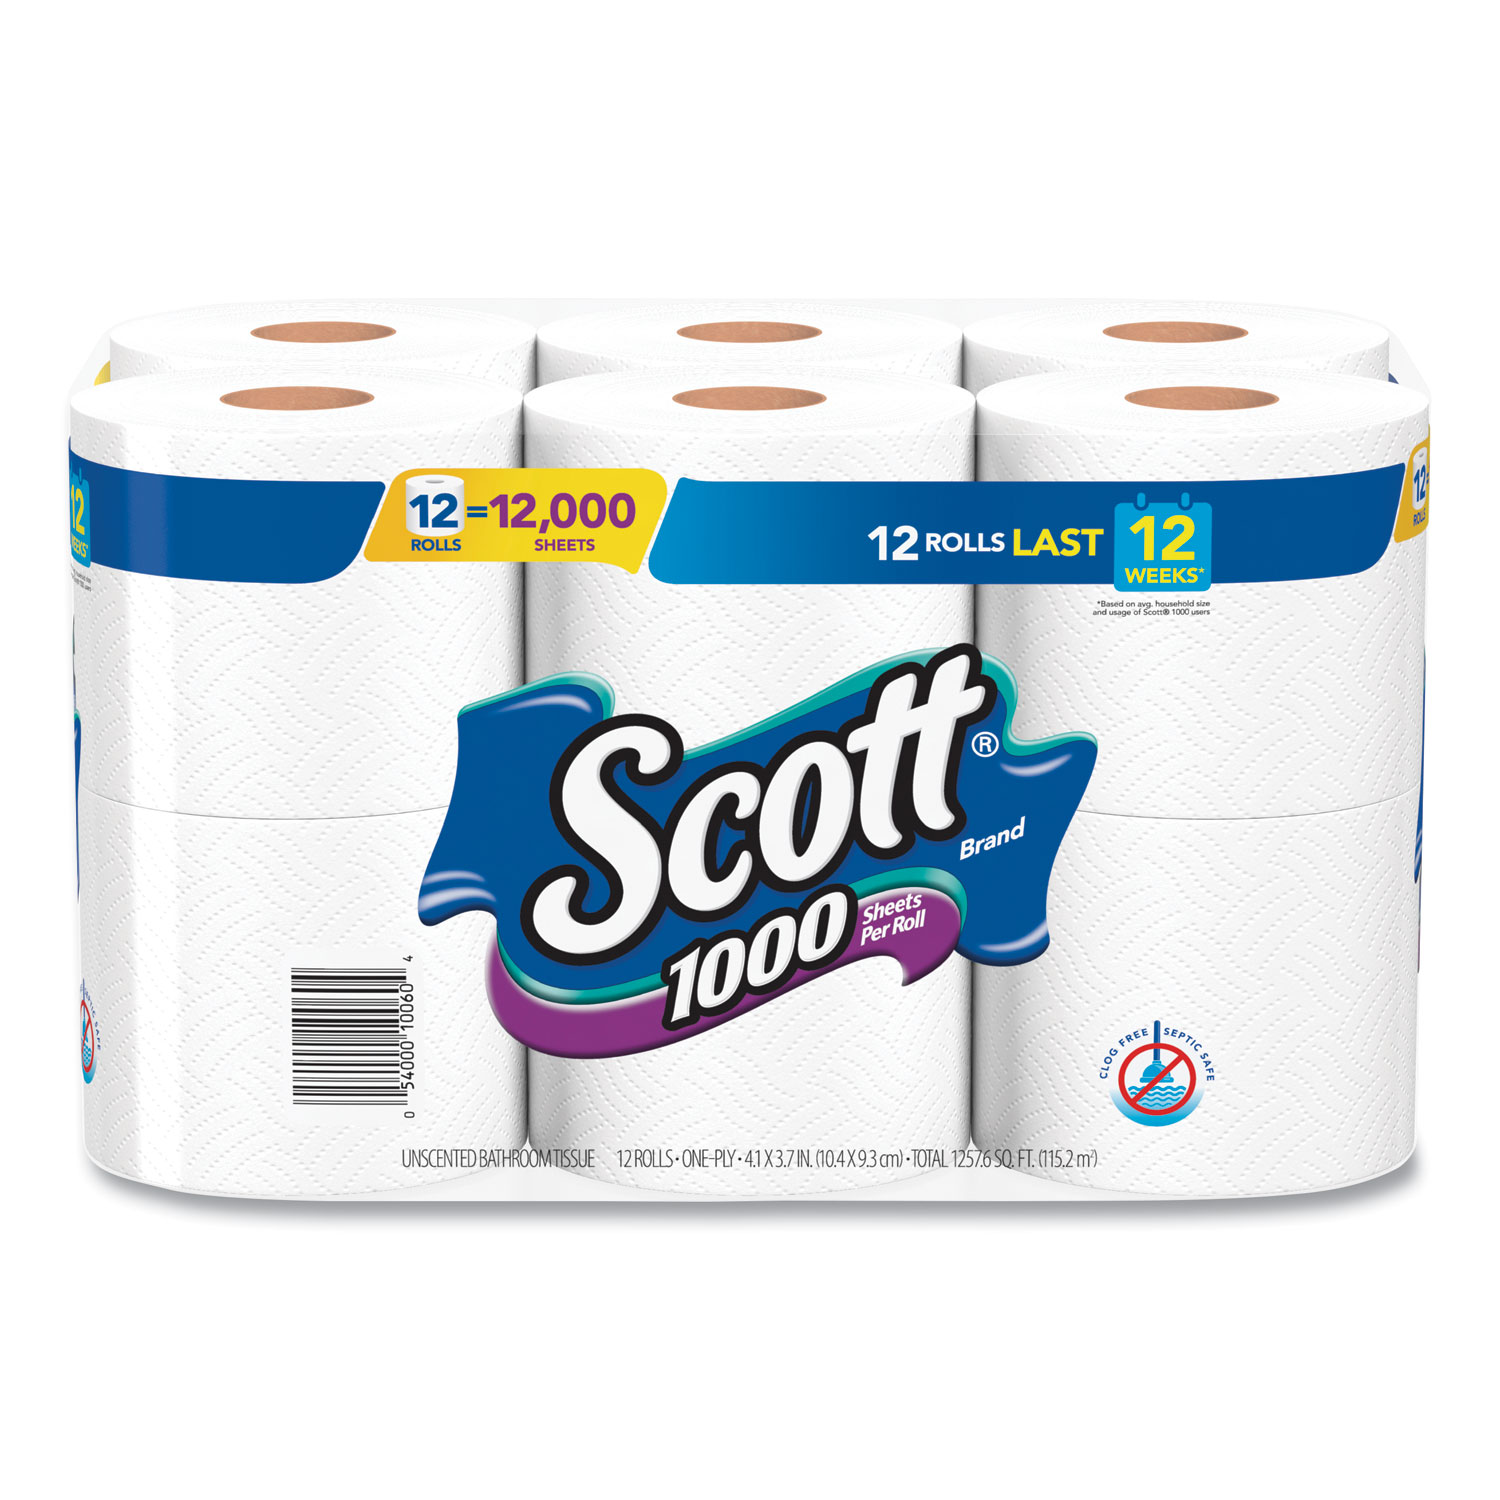  Scott 10060 Toilet Paper, Septic Safe, 1-Ply, White, 1000 Sheets/Roll, 12 Rolls/Pack, 4 Pack/Carton (KCC10060) 